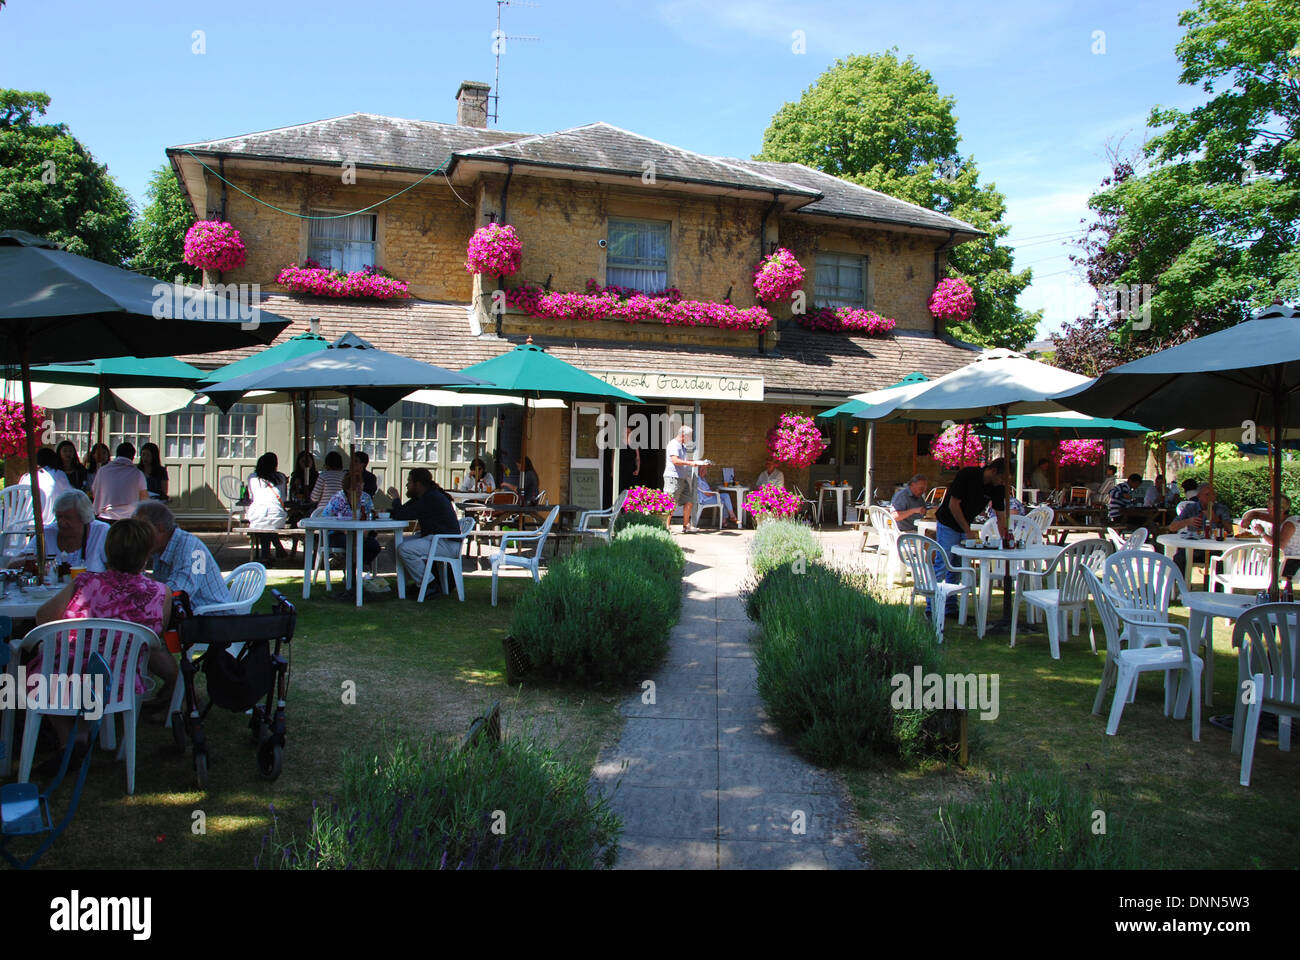 Windrush Garden Cafe en Bourton On The Water, Cotswolds, Royaume-Uni Banque D'Images